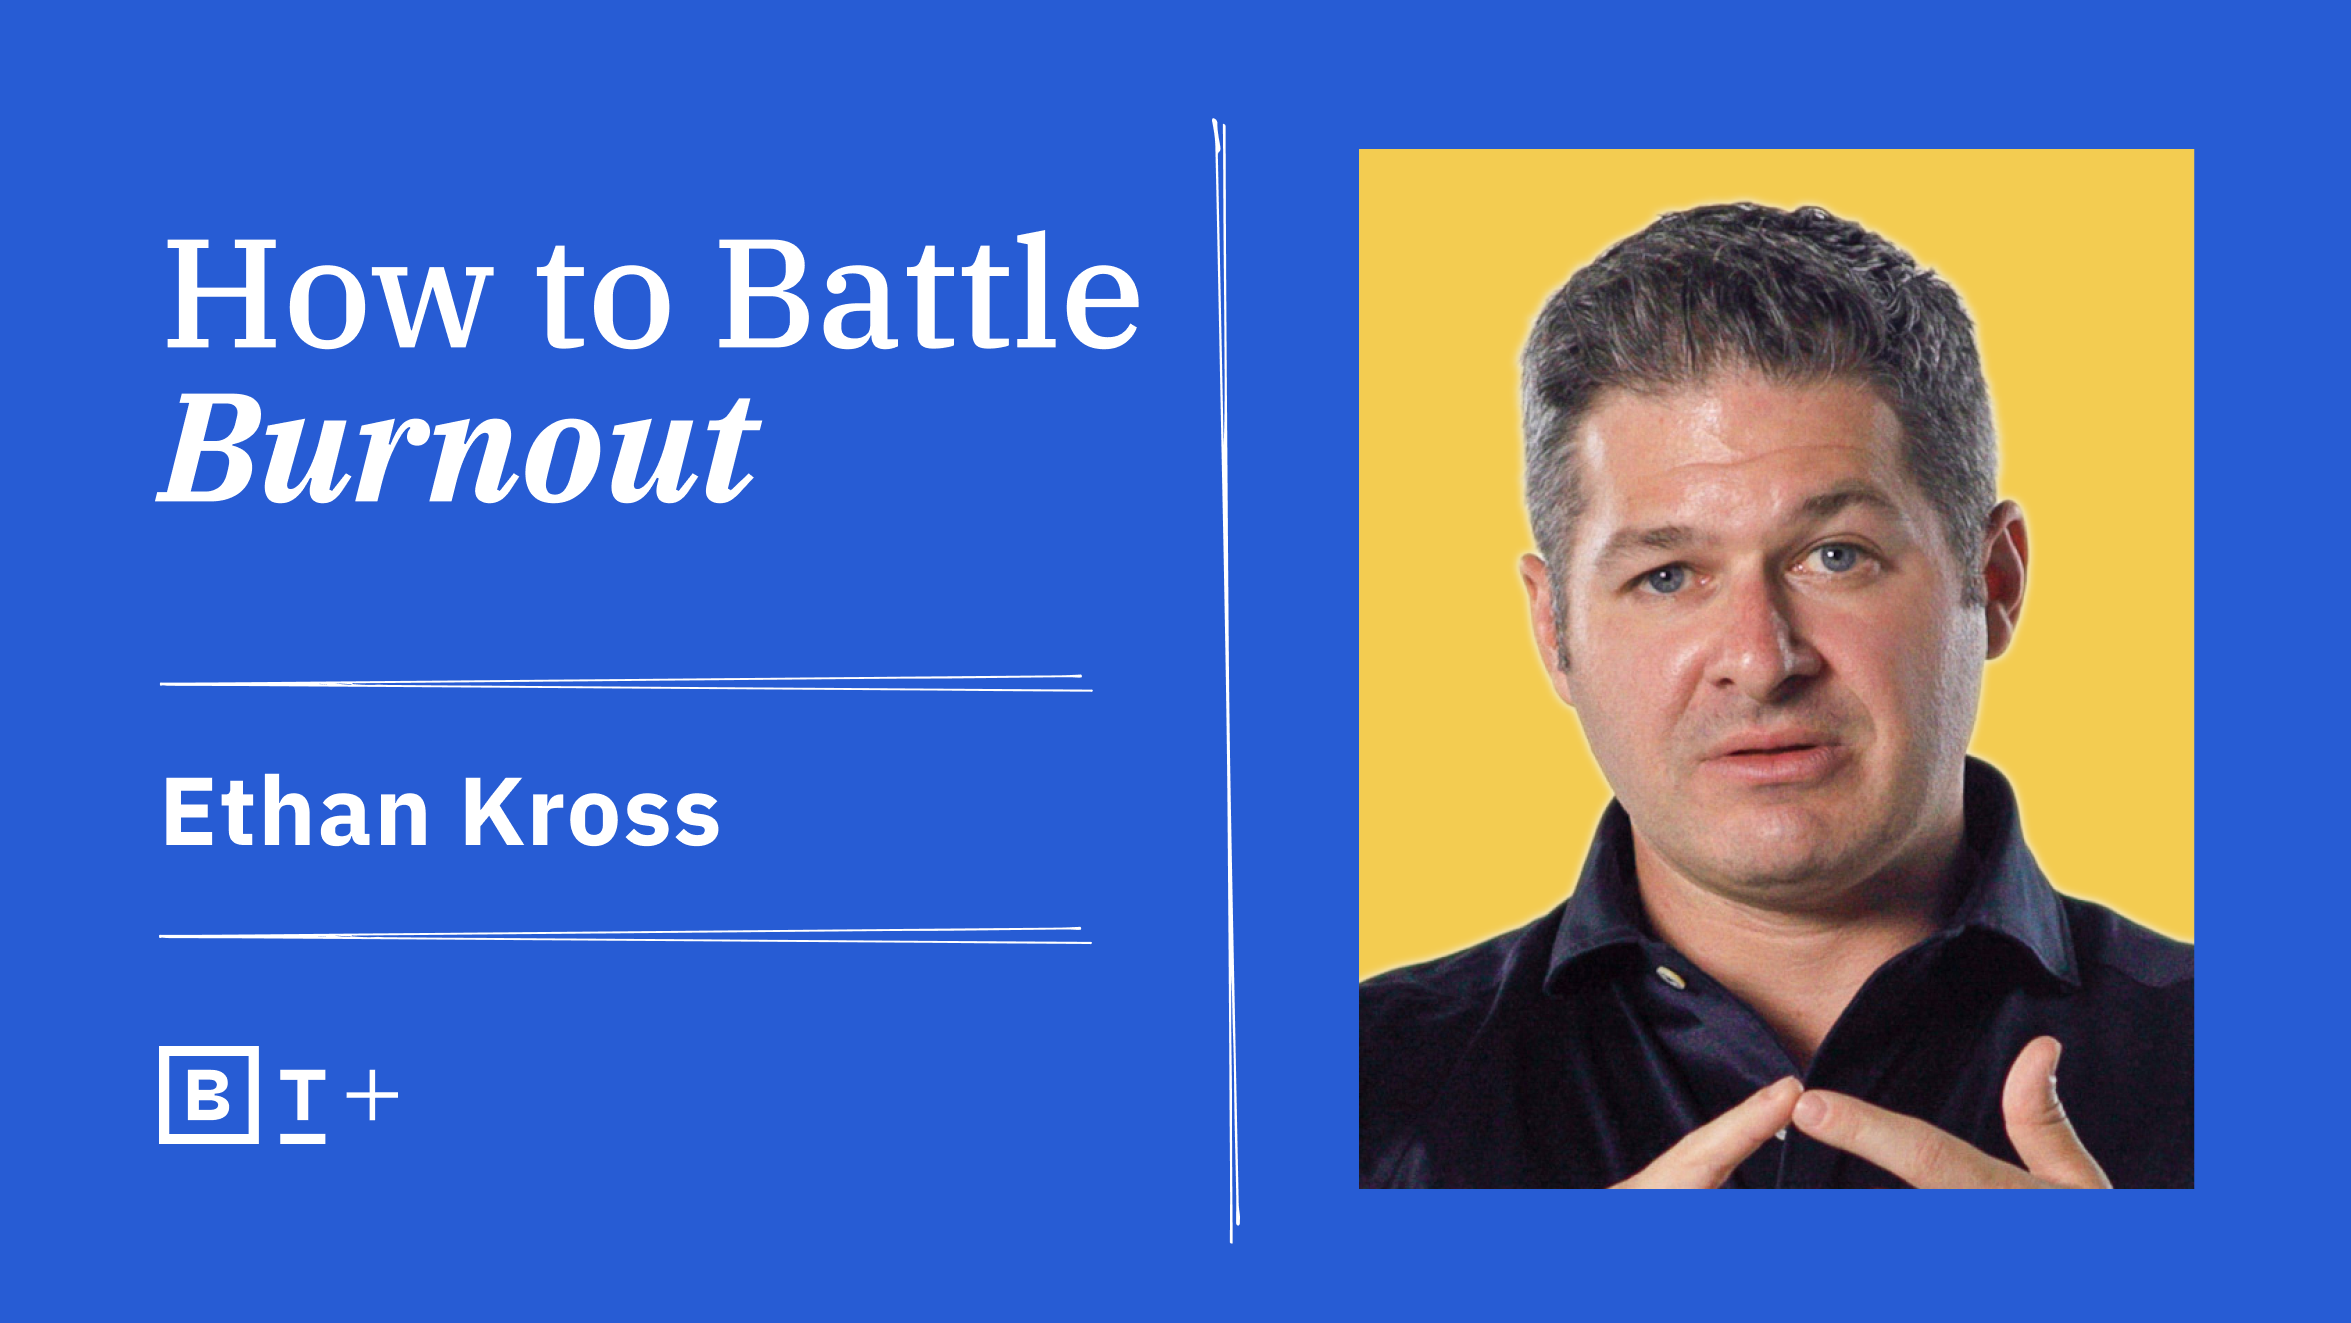 How to battle burnout with ethan kross.